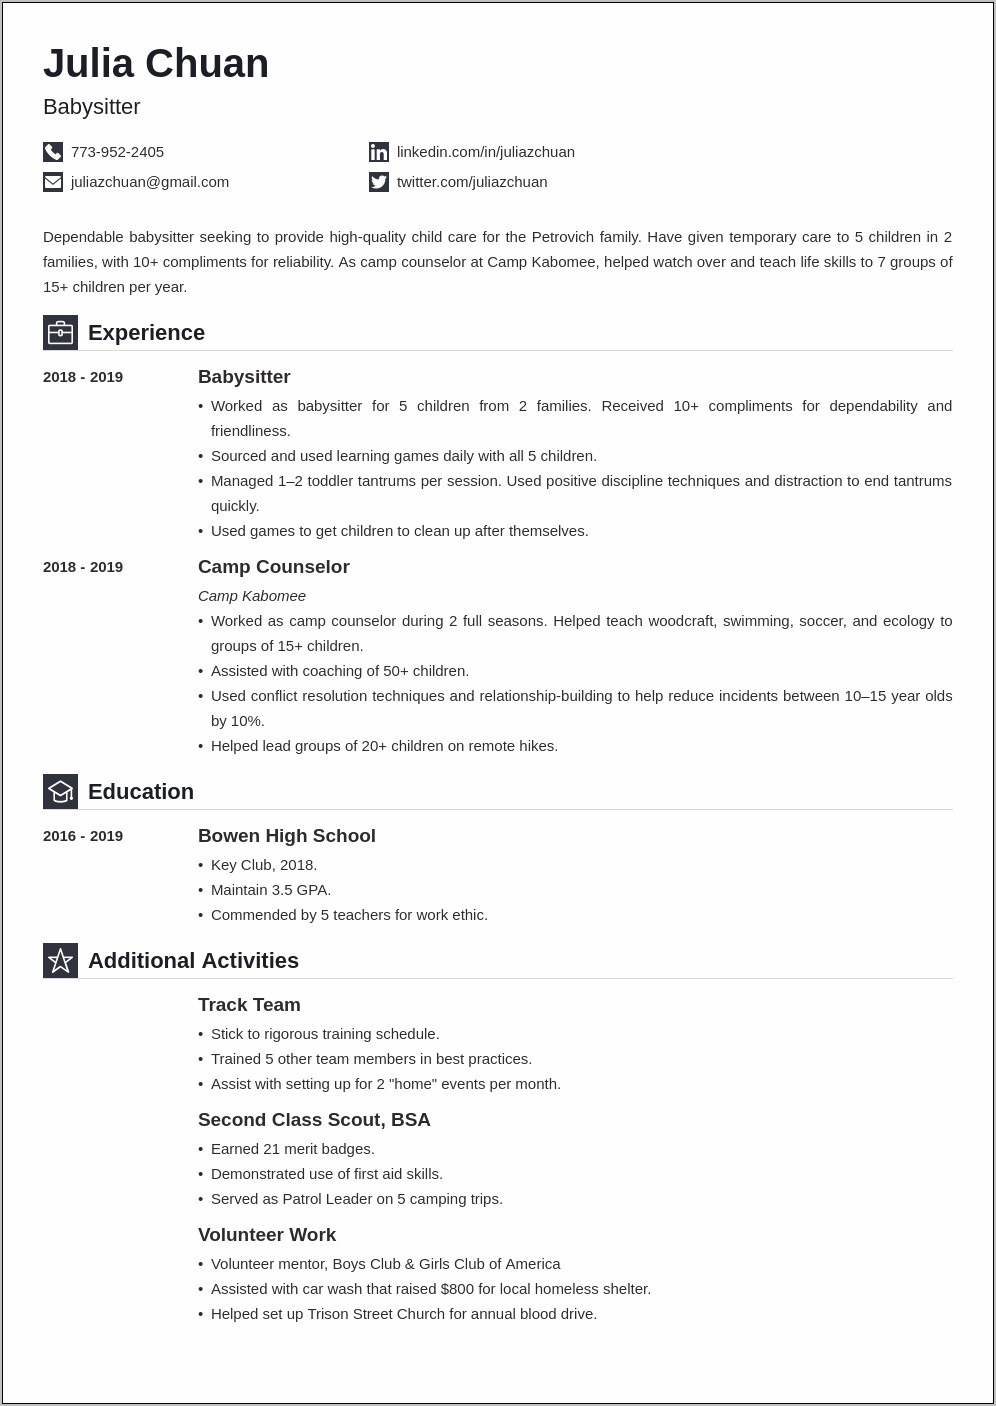 Additional Skills And Achievements In Resume